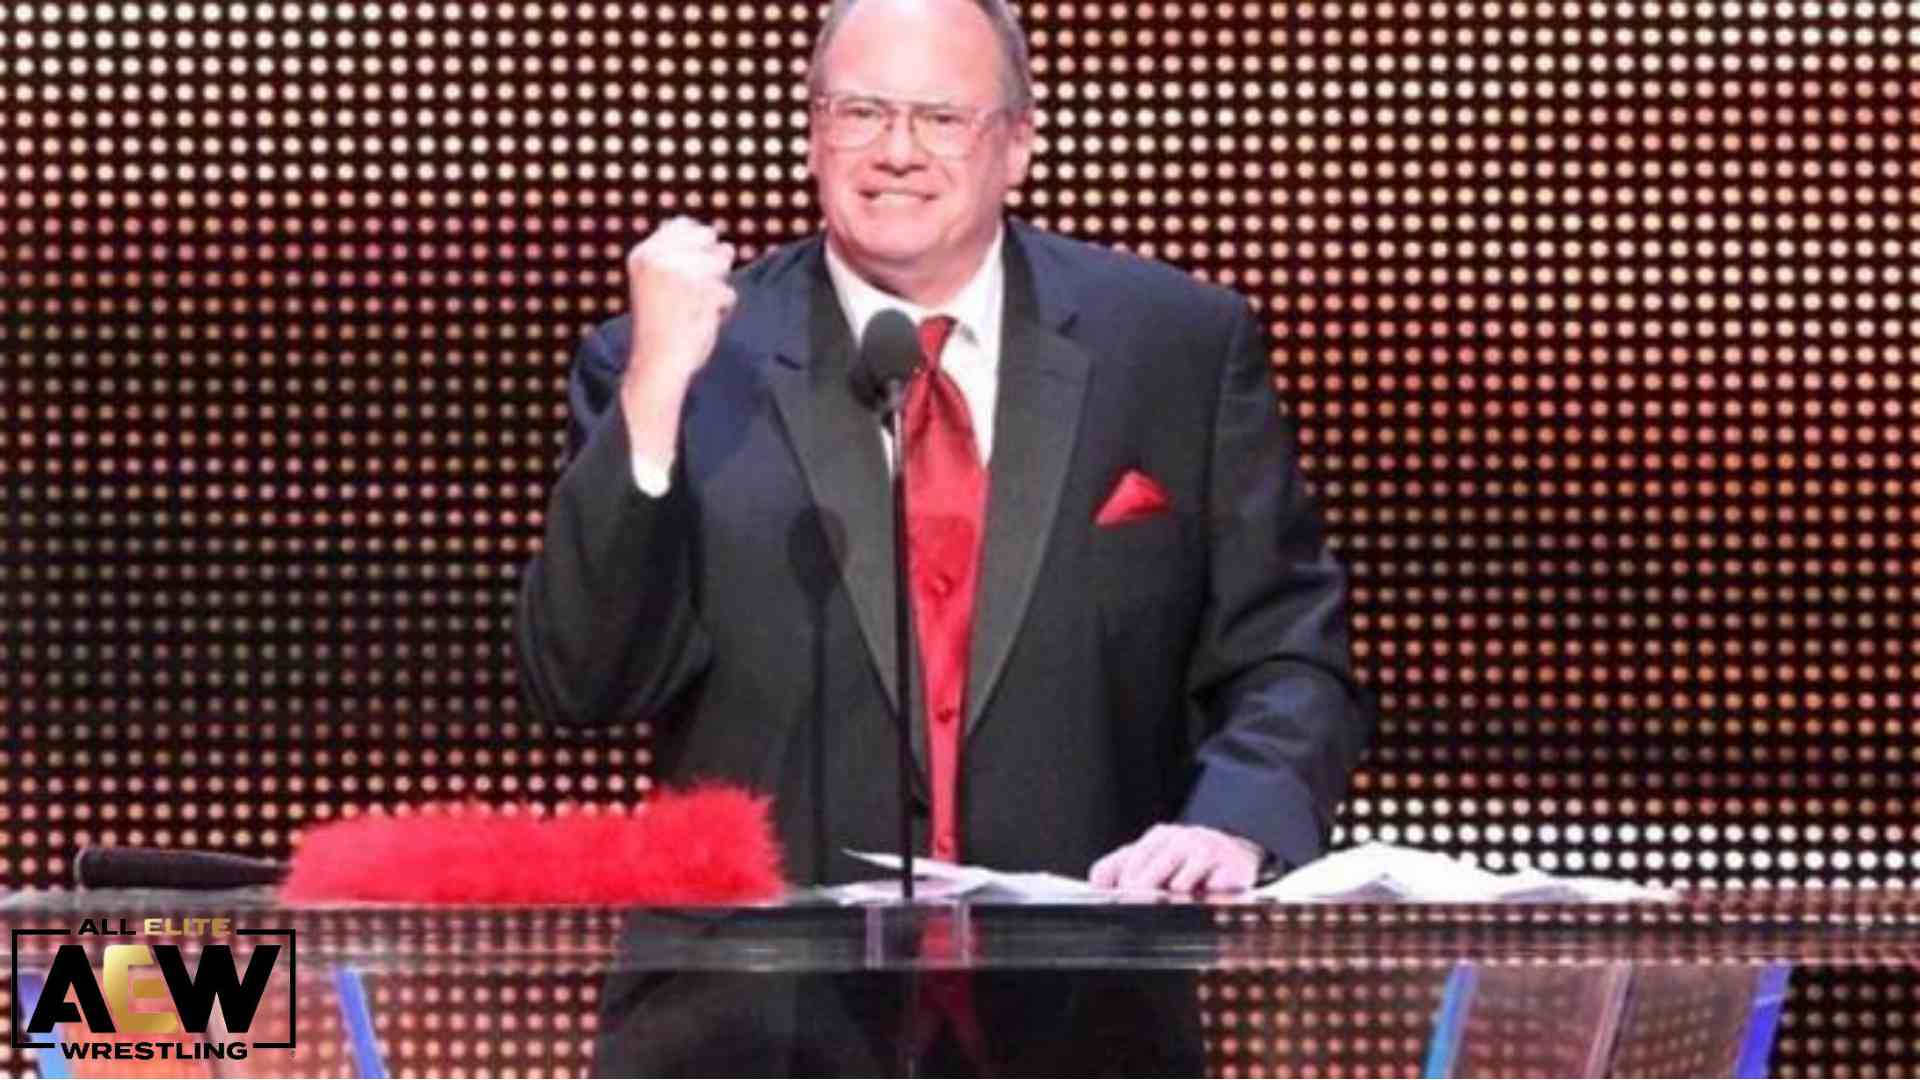 WWE Hall of Famer is done with AEW, according to Jim Cornette 